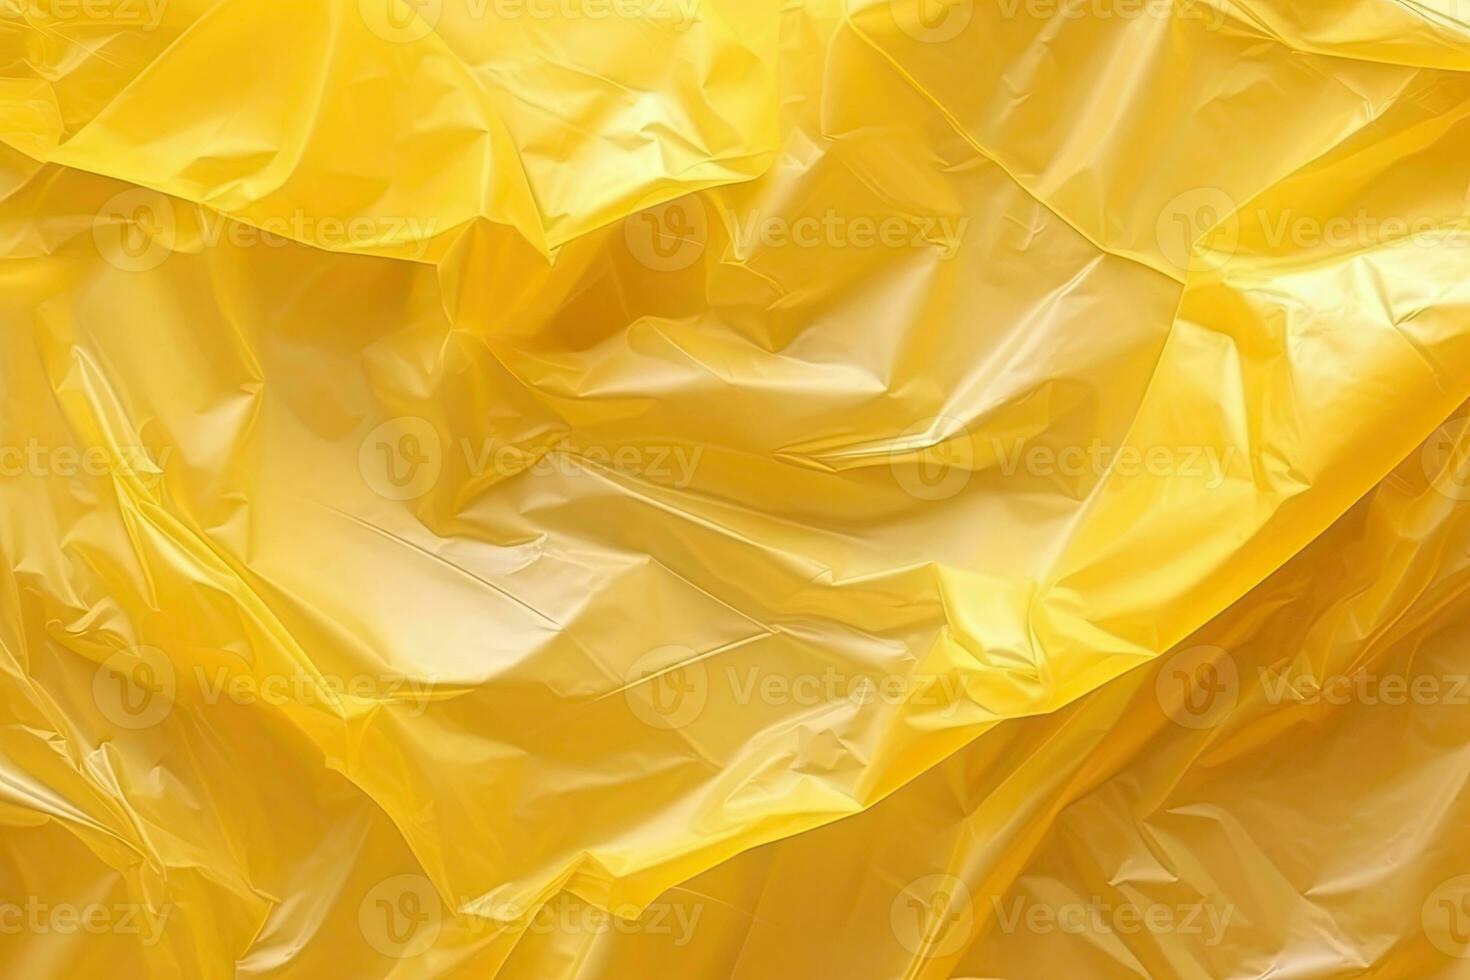 bright yellow plastic wrap overlay backdrop. crumpled and draped textured cellophane material photo